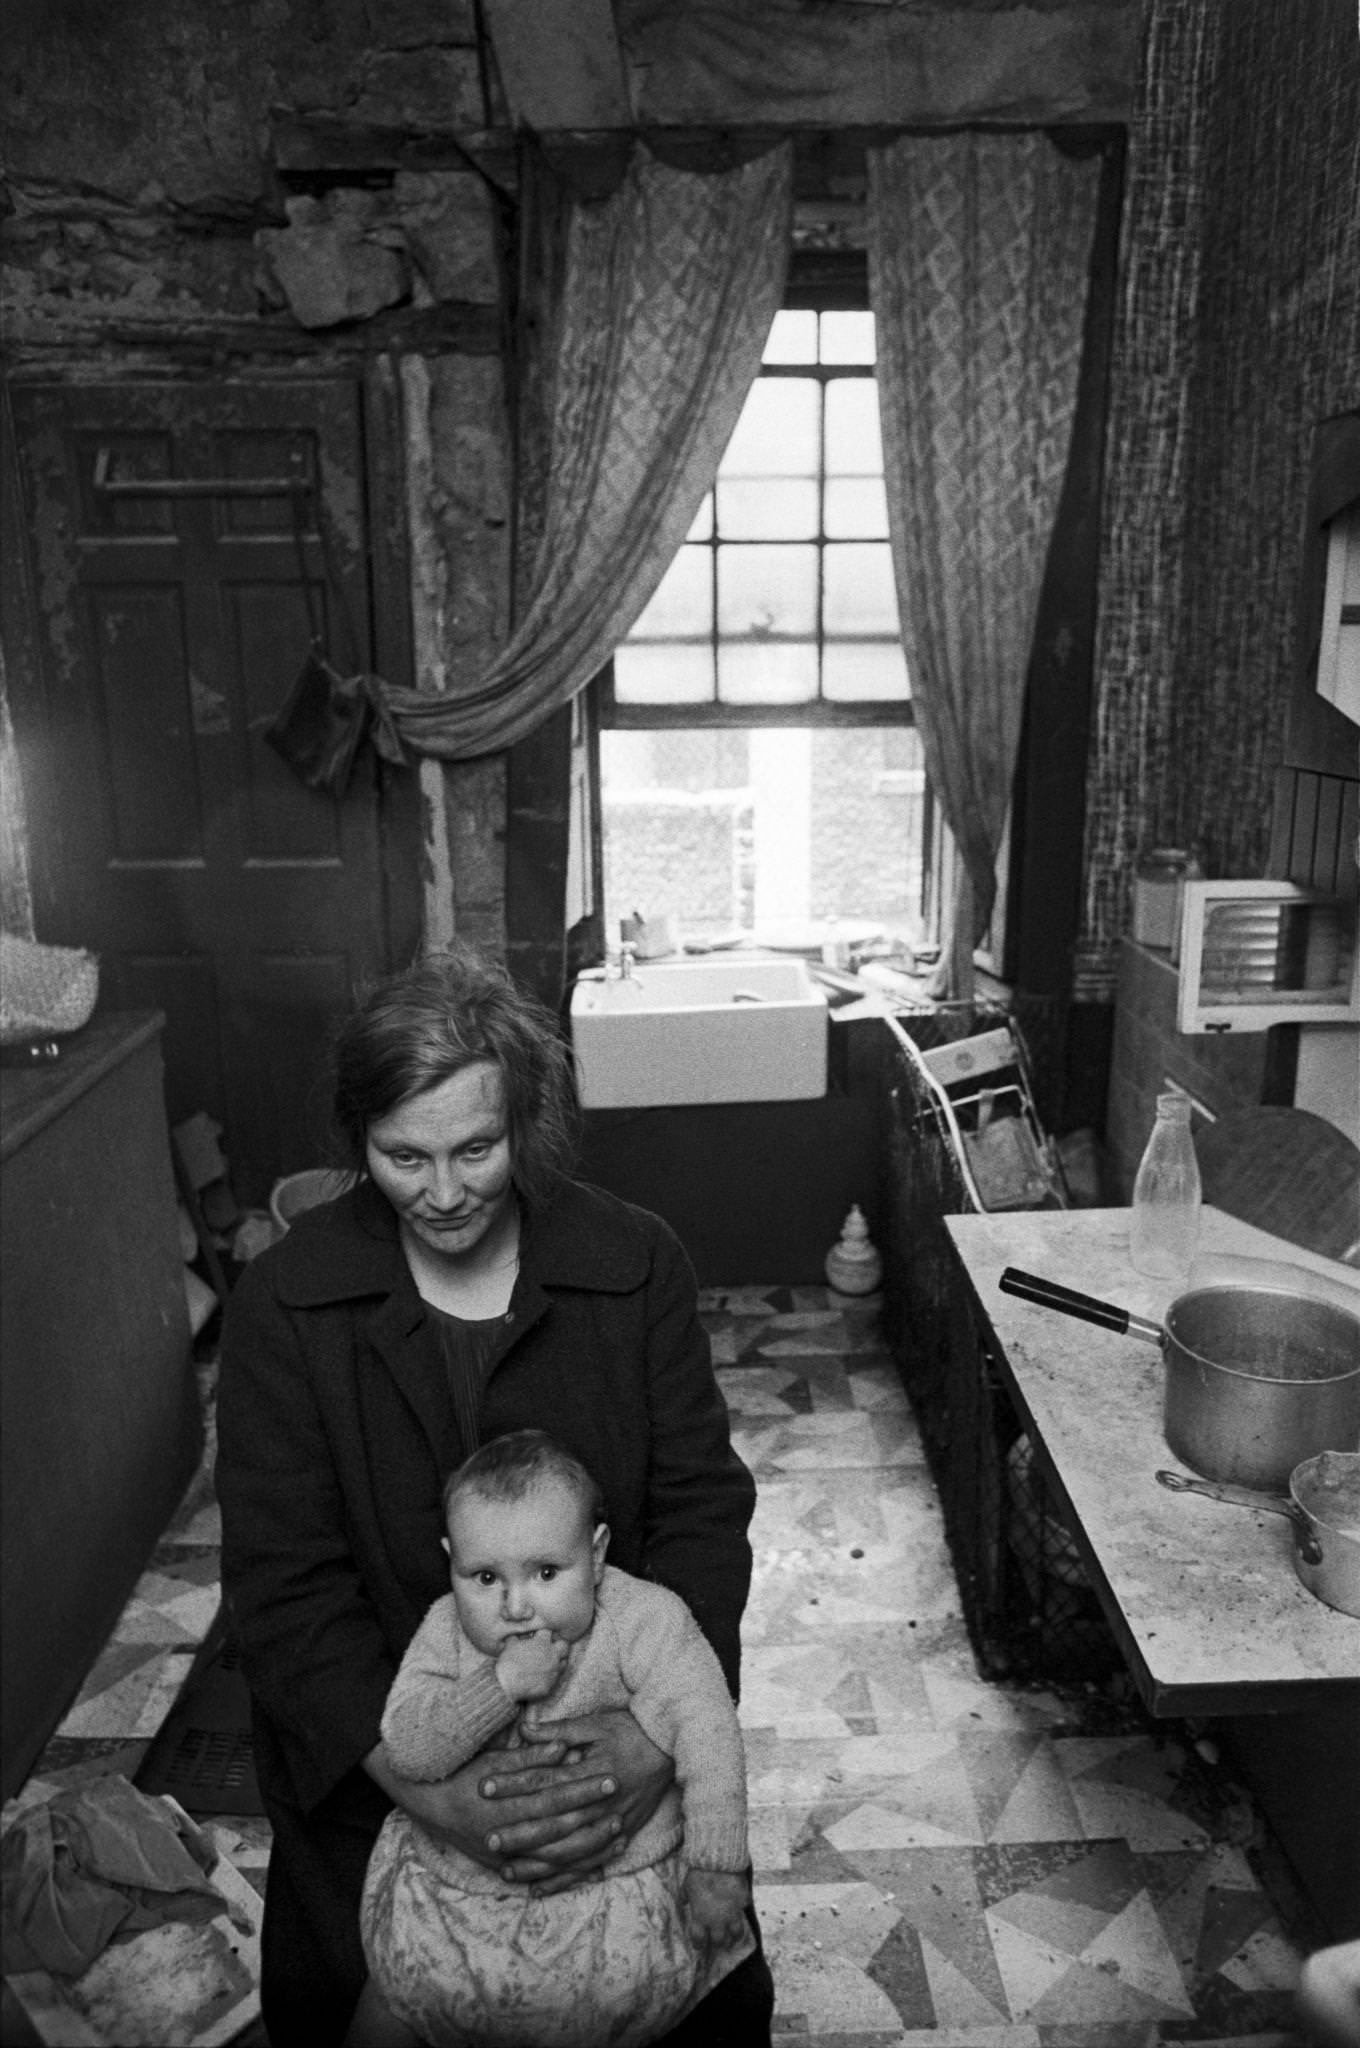 A mother holding her child in the kitchen of her flat in the notorious Gorbals district of Glasgow, 1969.